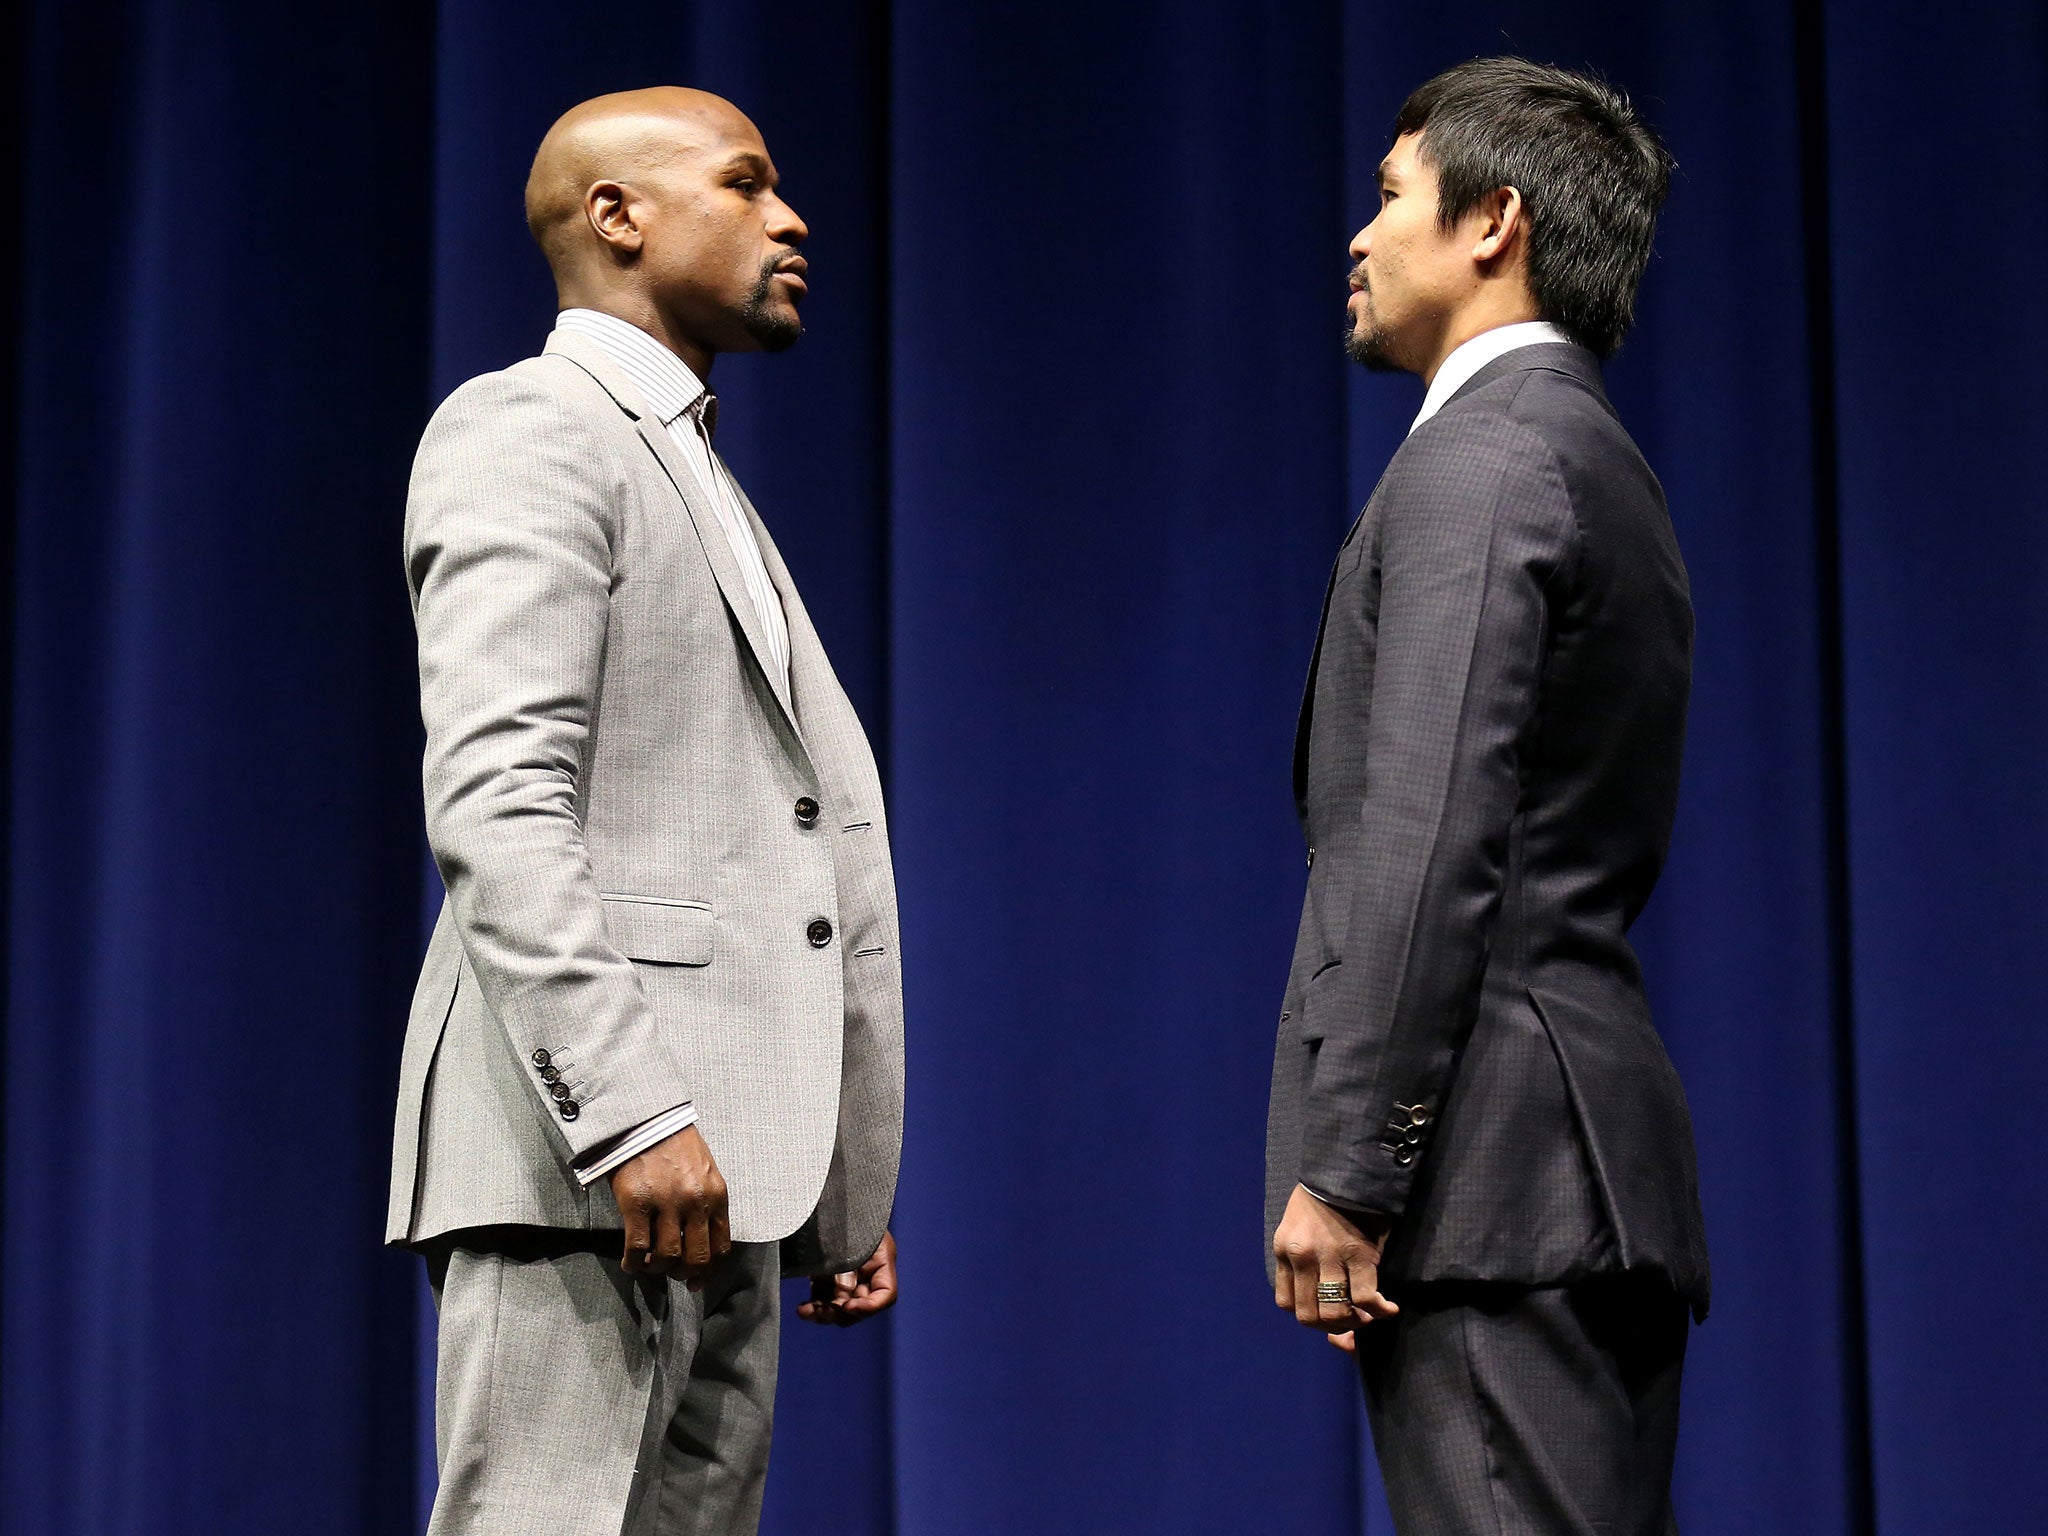 Floyd Mayweather and Manny Pacquiao went head-to-head last month